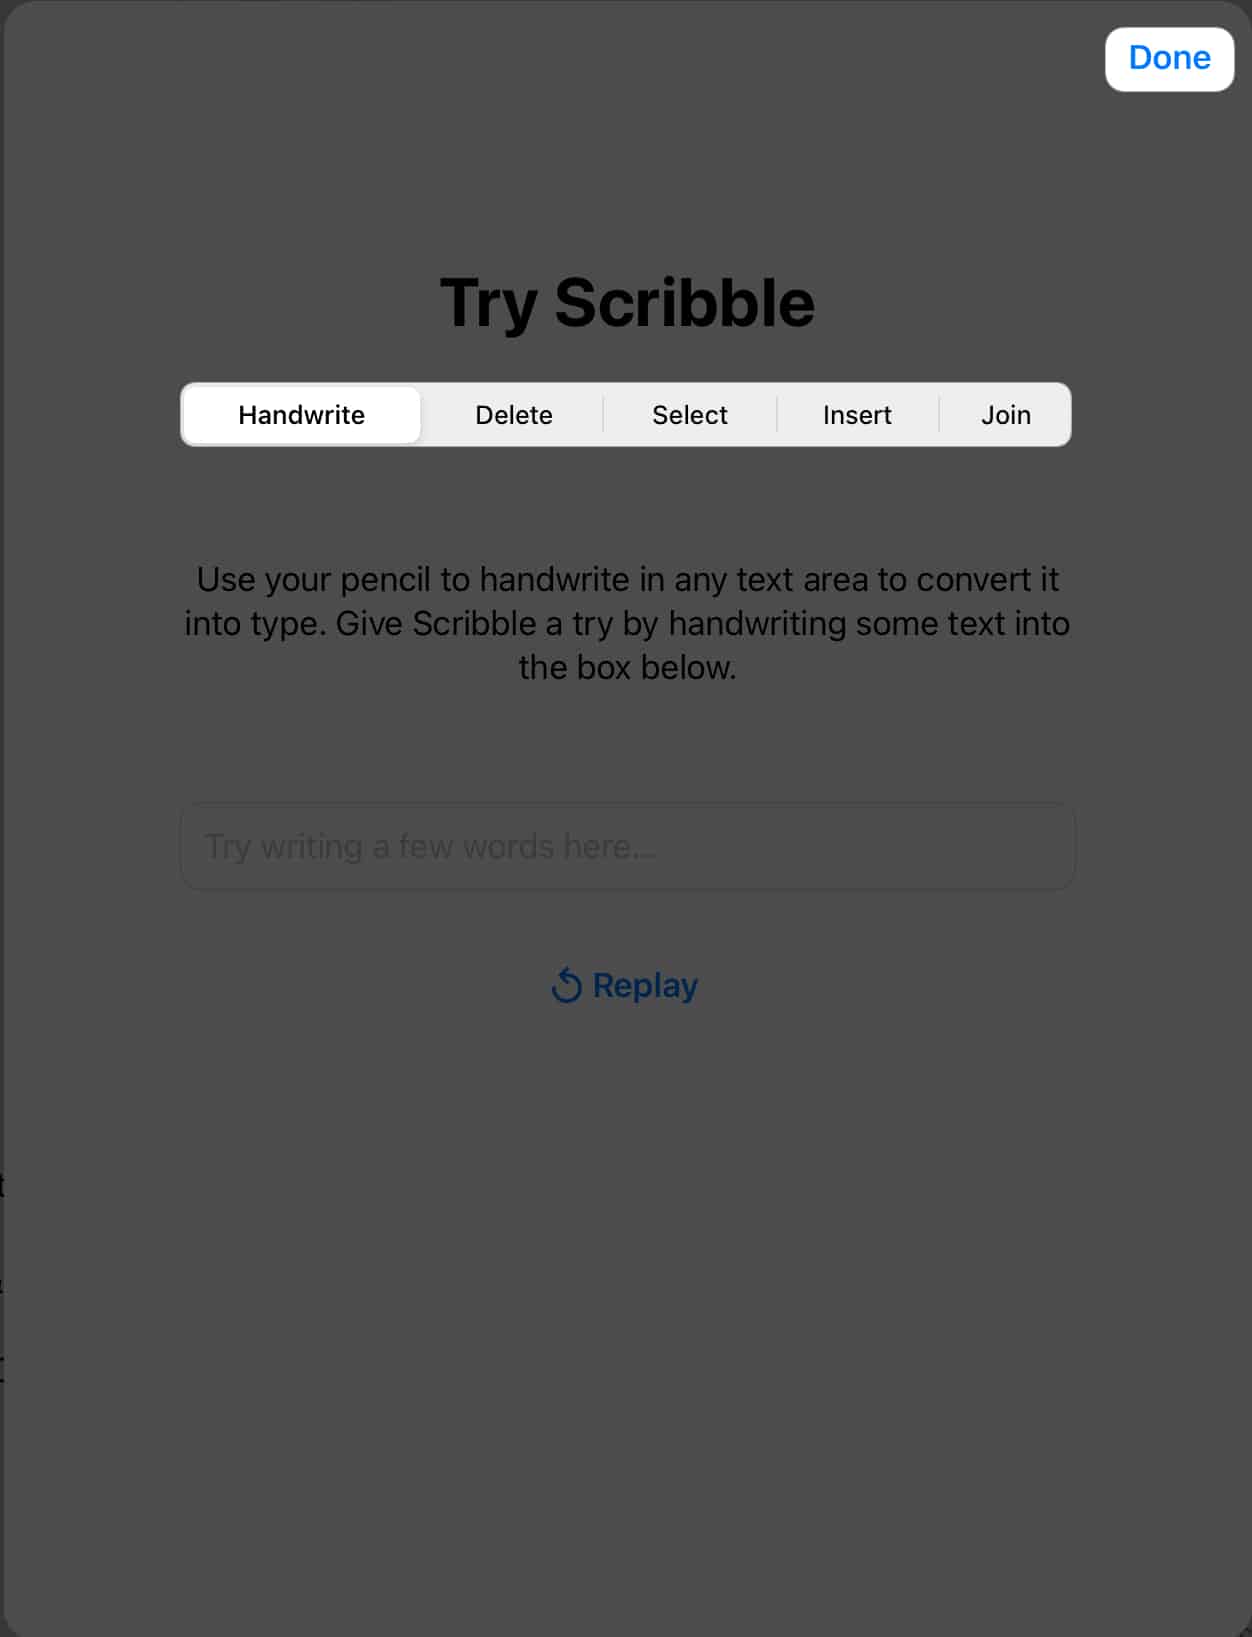 Try Scribble, and Done to conclude the process